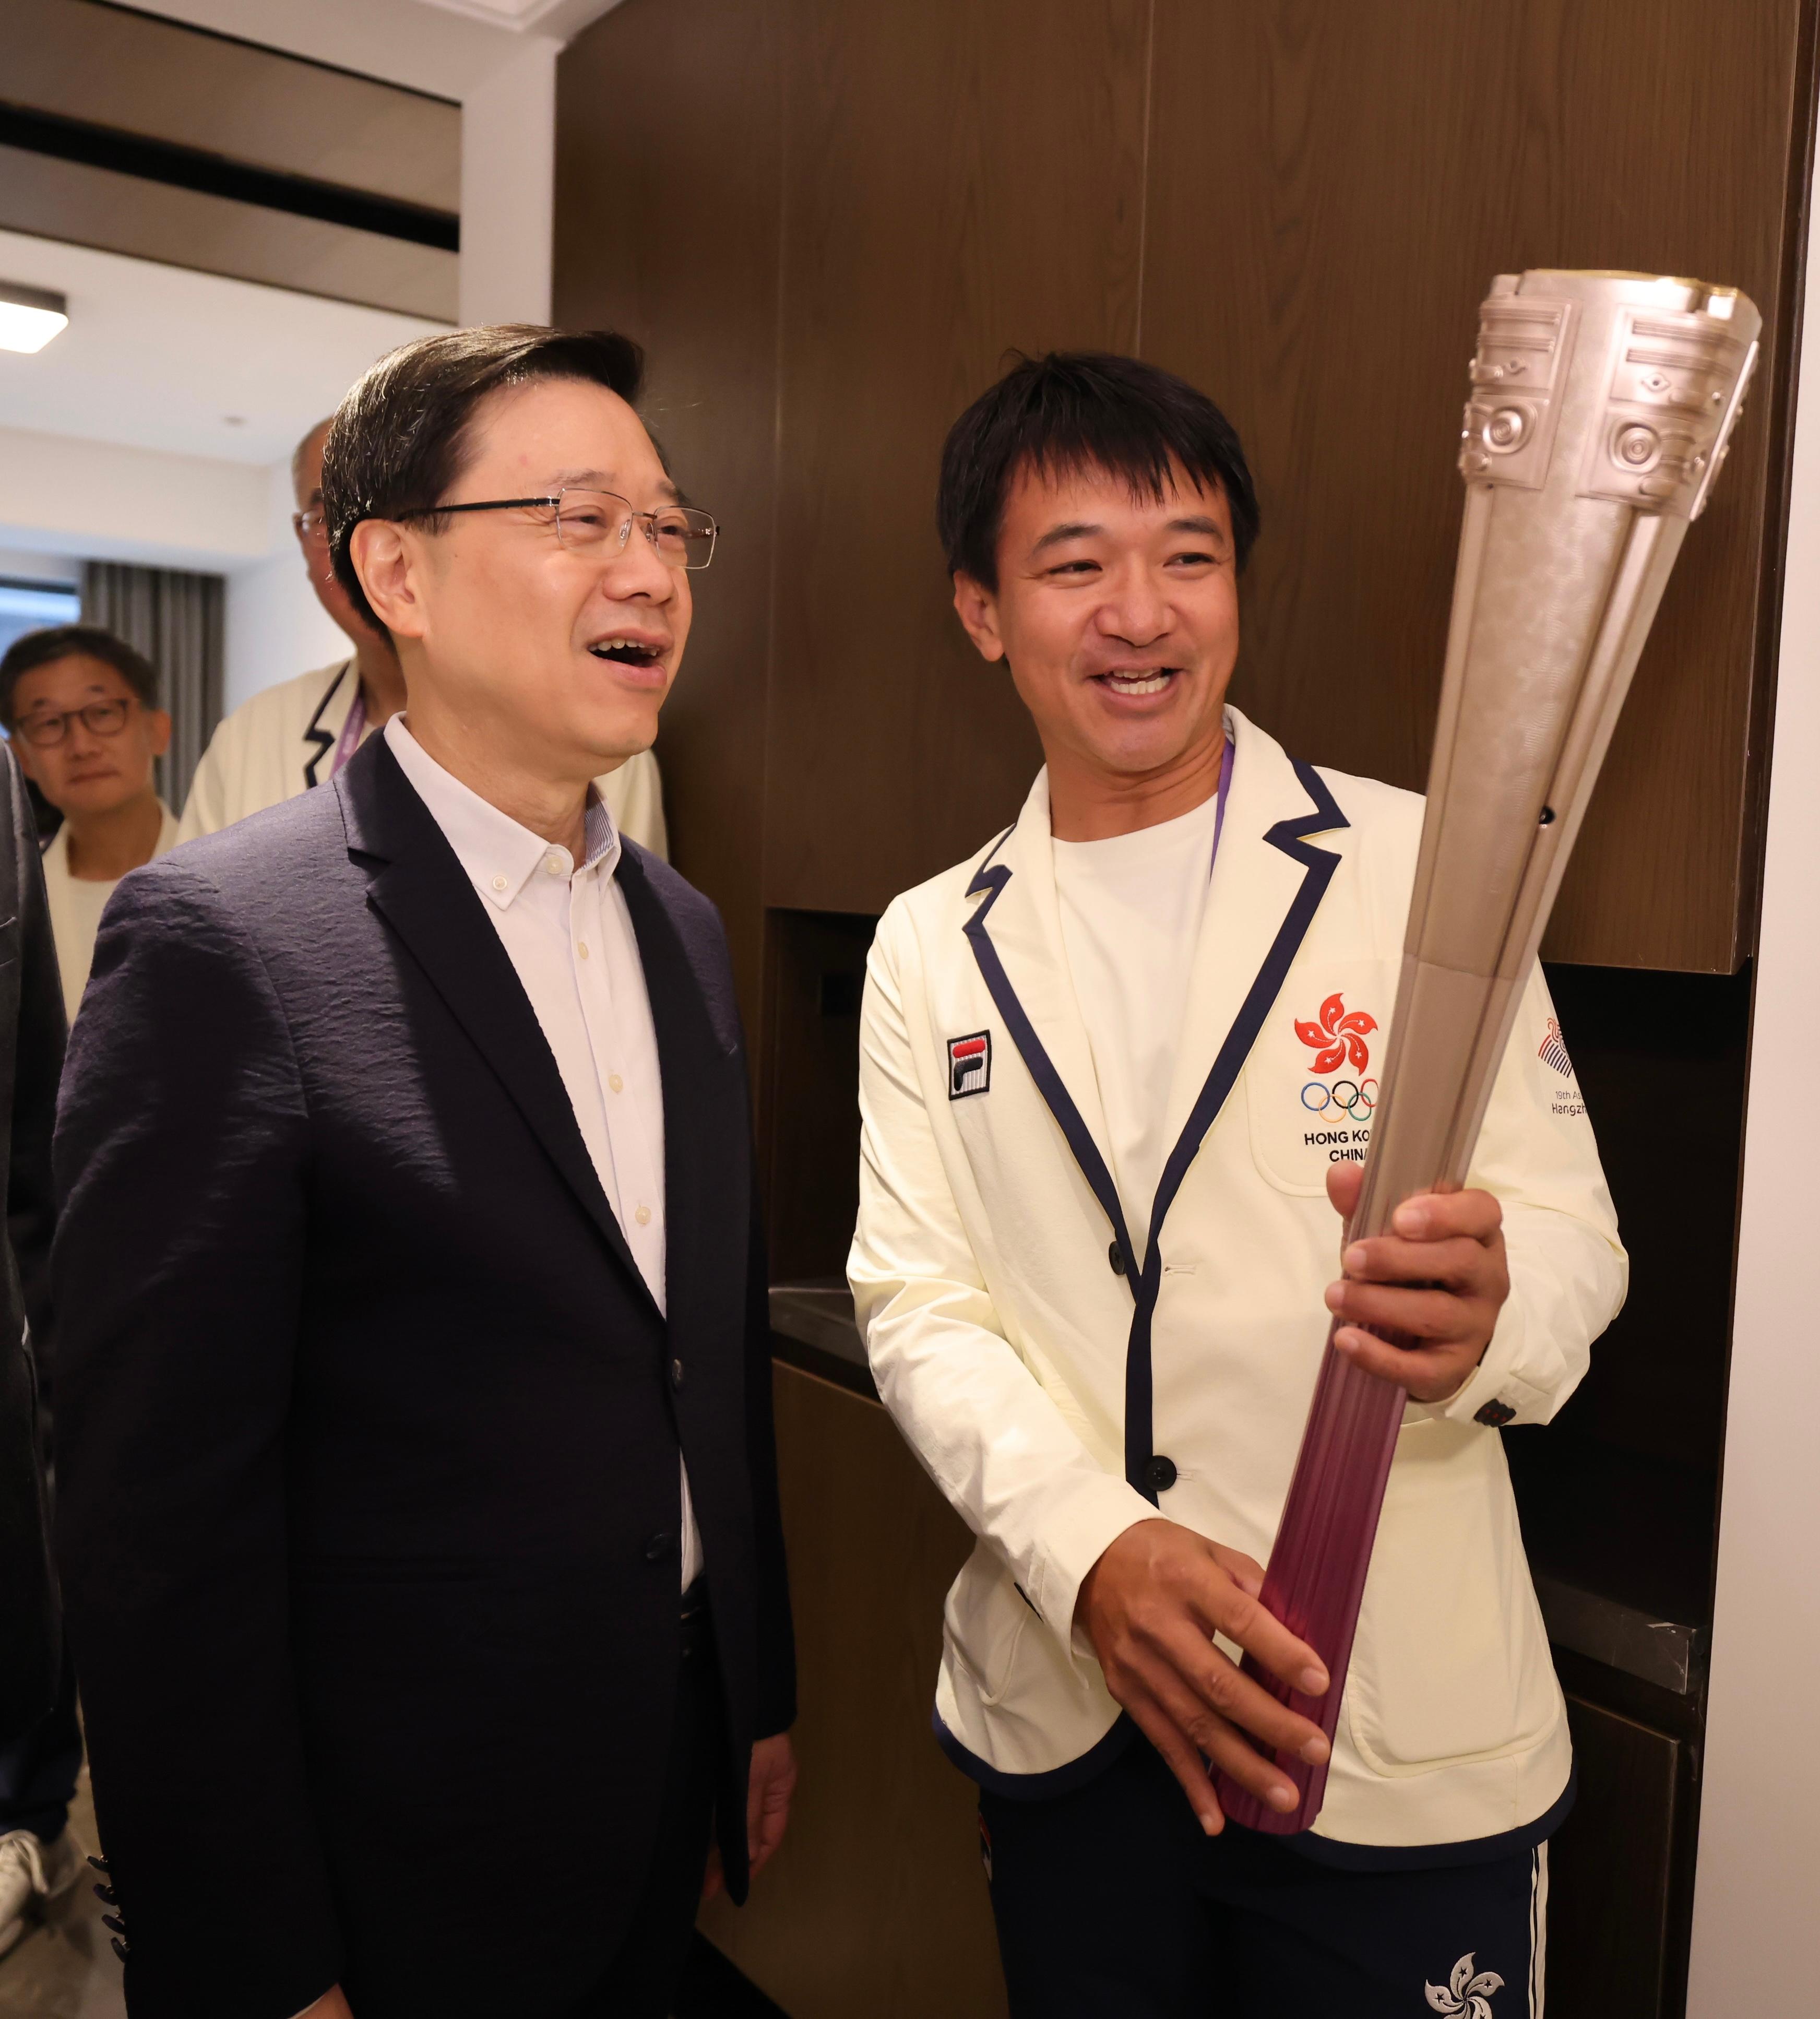 The Chief Executive, Mr John Lee, led a delegation of the Hong Kong Special Administrative Region Government to attend the opening ceremony of the 19th Asian Games Hangzhou (Asian Games) today (September 22). Photo shows Mr Lee (left) listening to the sharing from cyclist Wong Kam-po (right) on his experience and feelings as a torch bearer of the Asian Games.